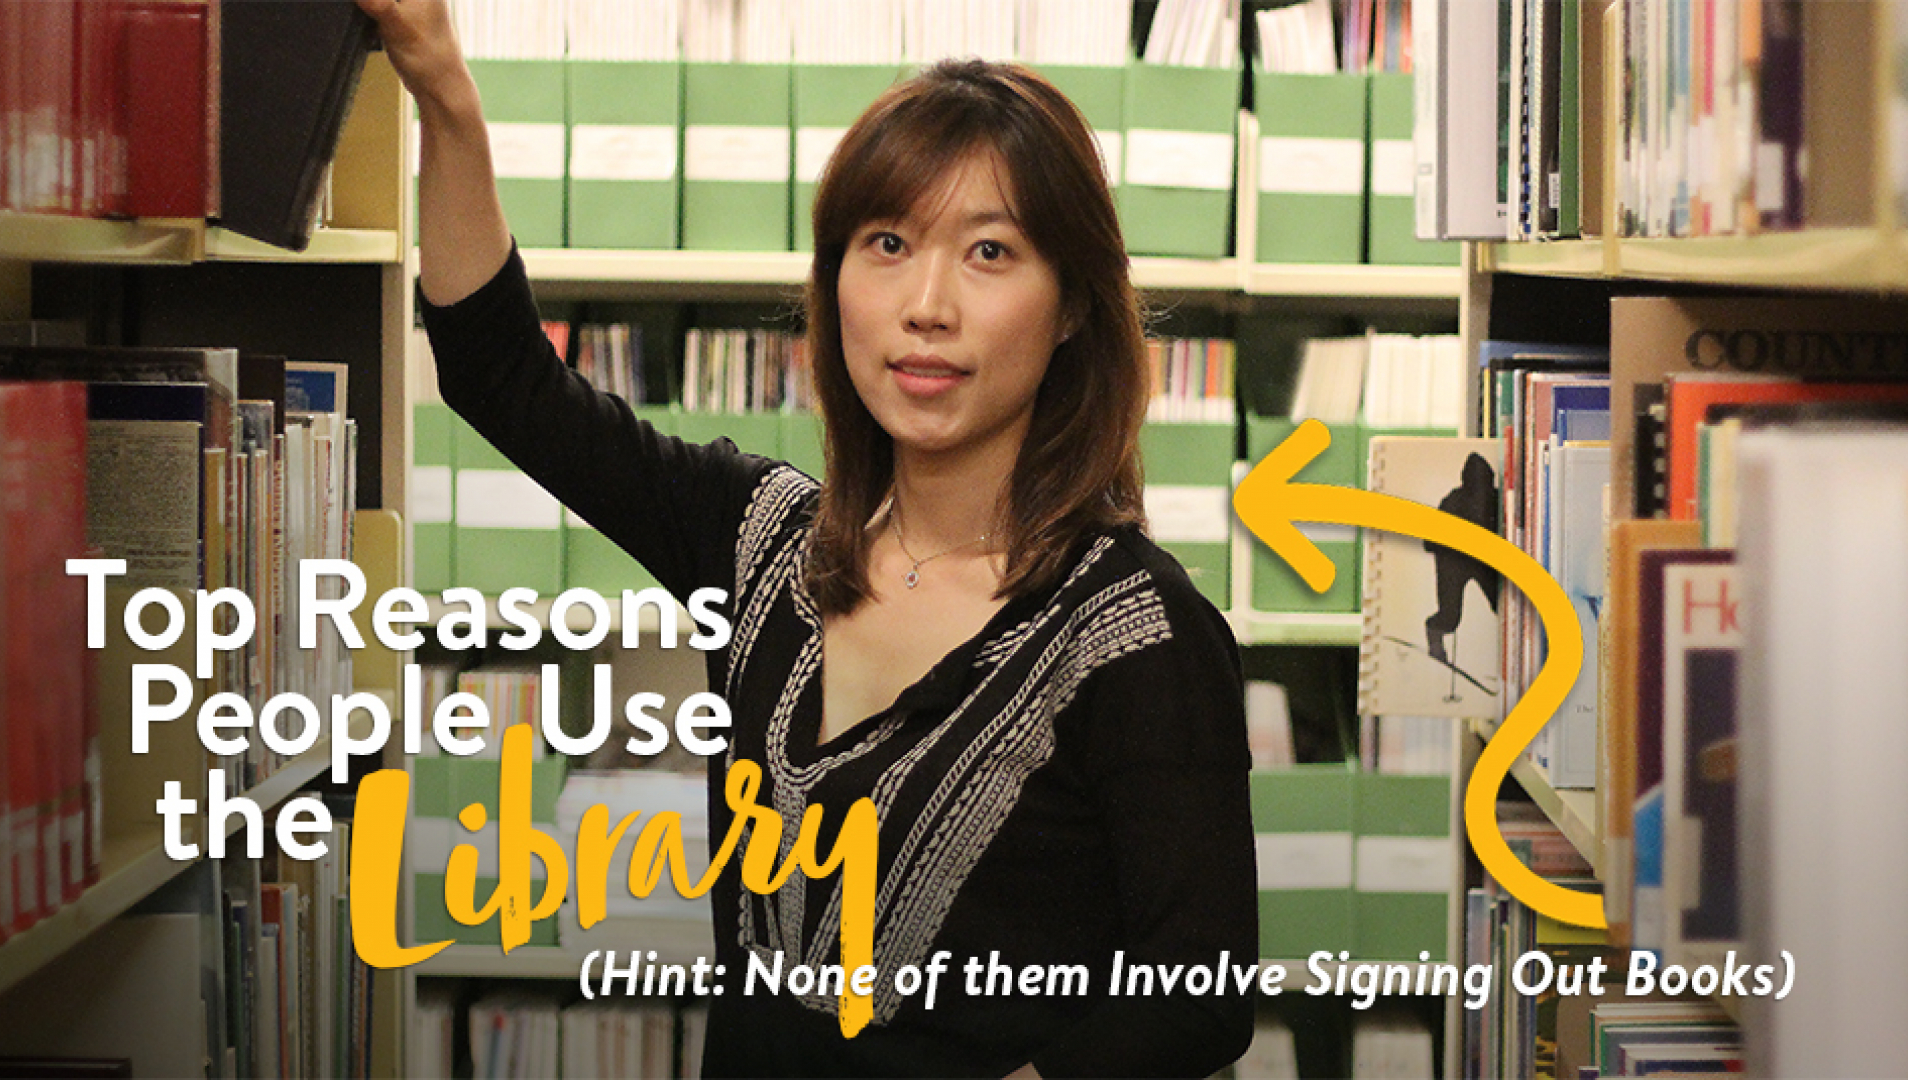 Top Reasons People Use the Library